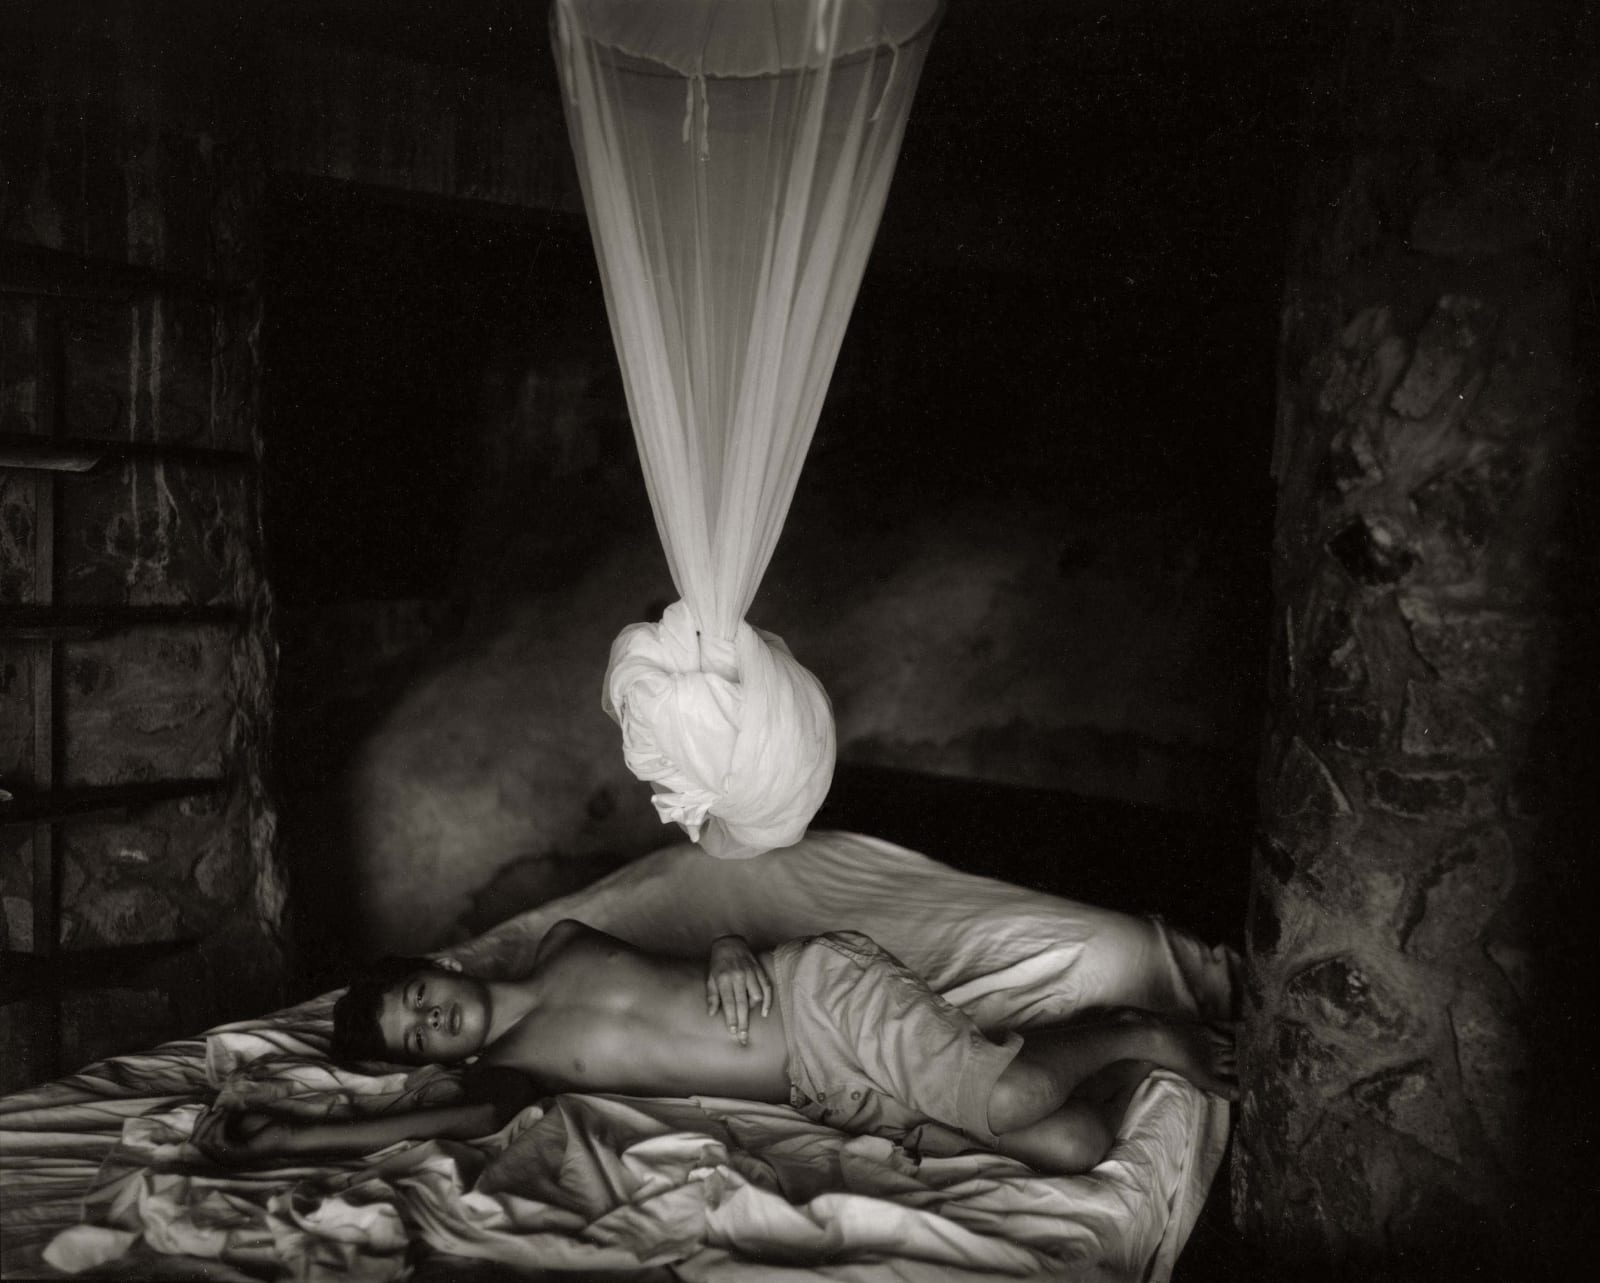 Emmett lying on bed with mosquito ned tied above him, Sheet Changing Day, from Immediate Family series by Sally Mann